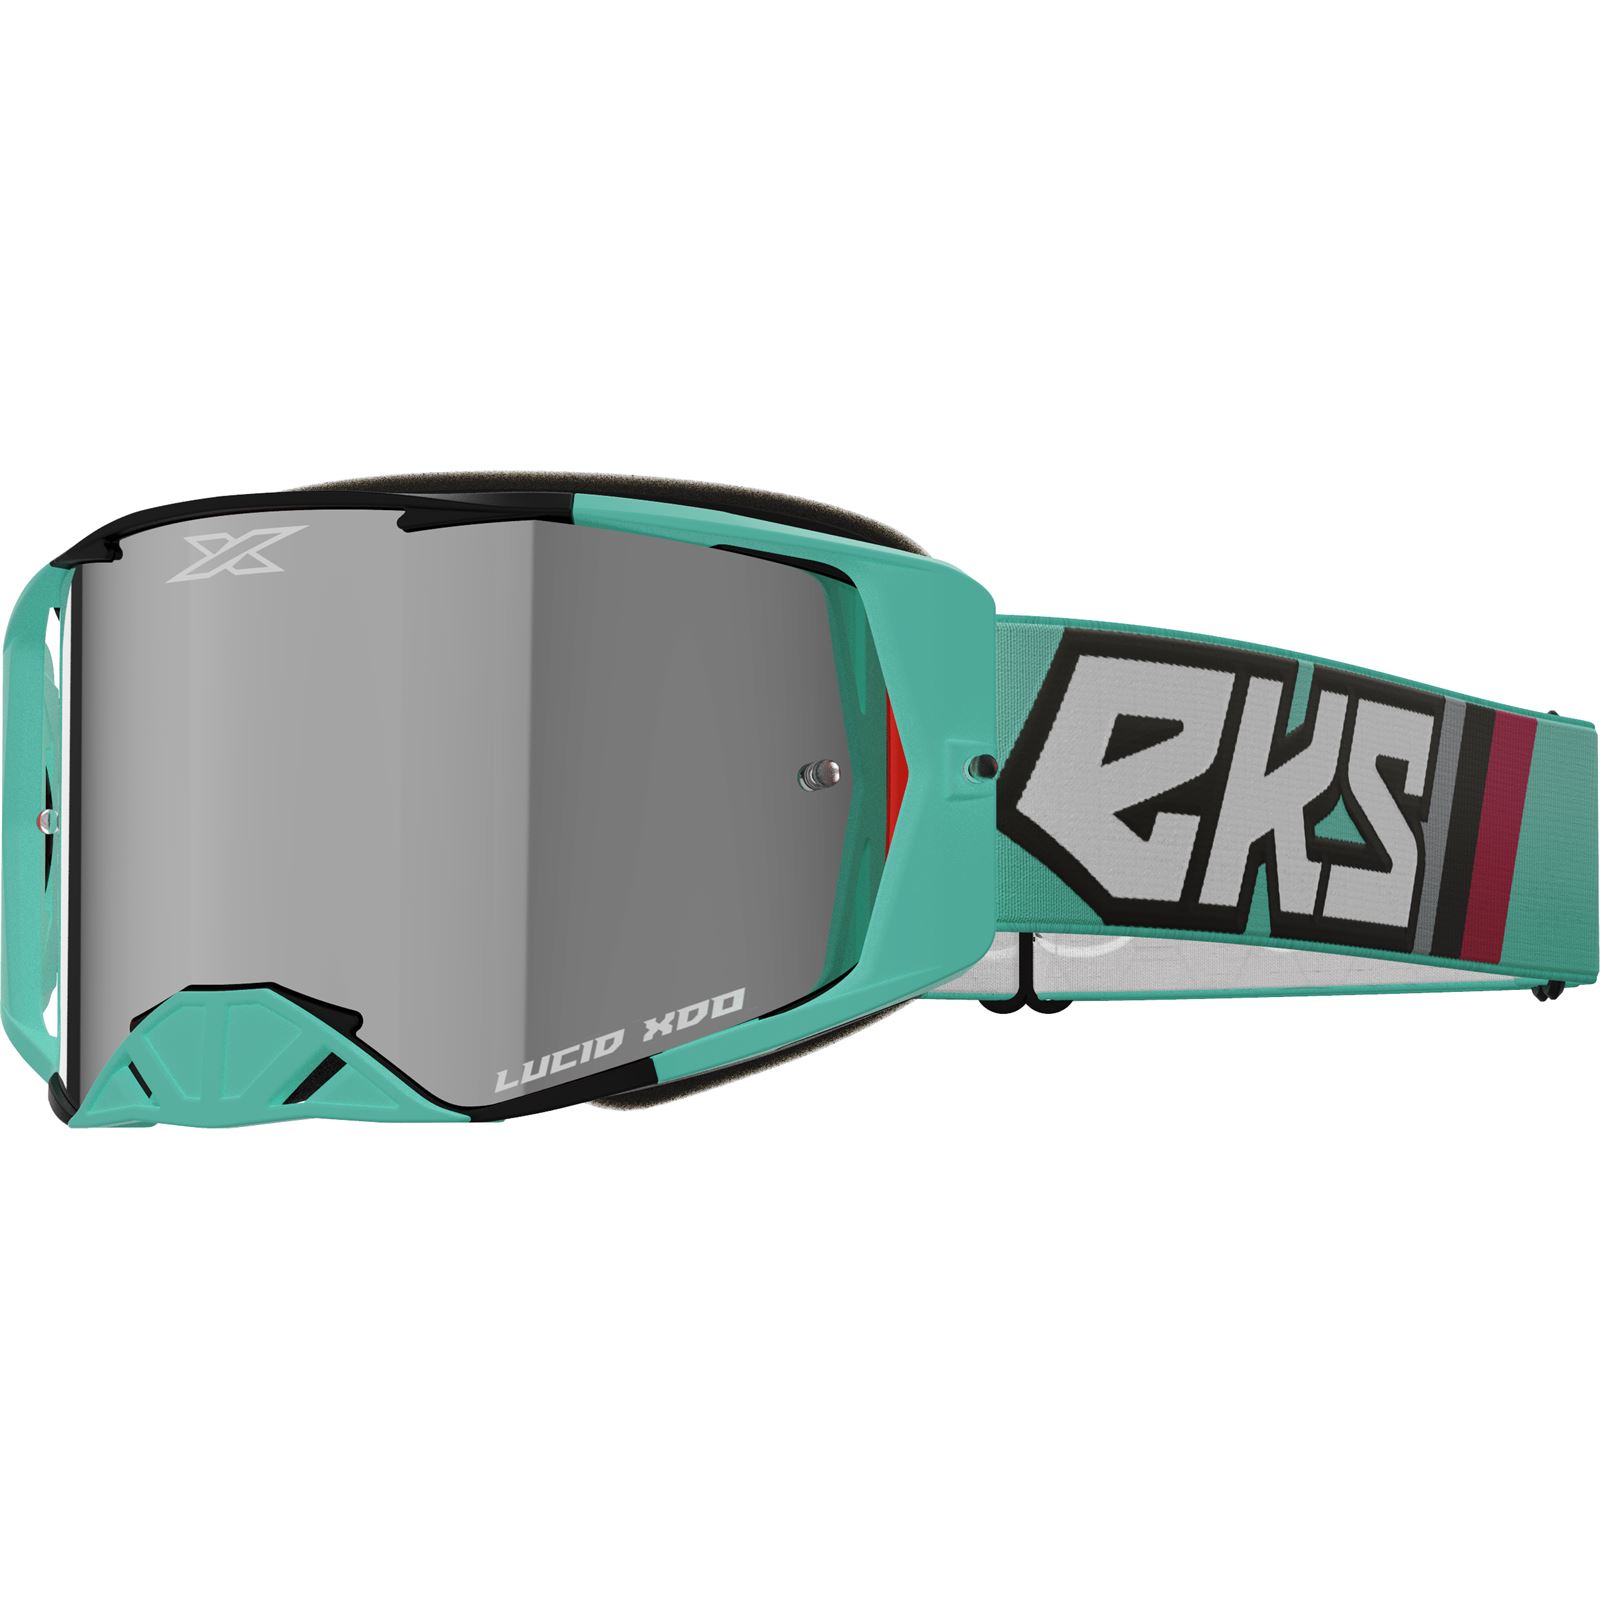 EKS Brand Lucid Goggles Minty/Silver Mirror